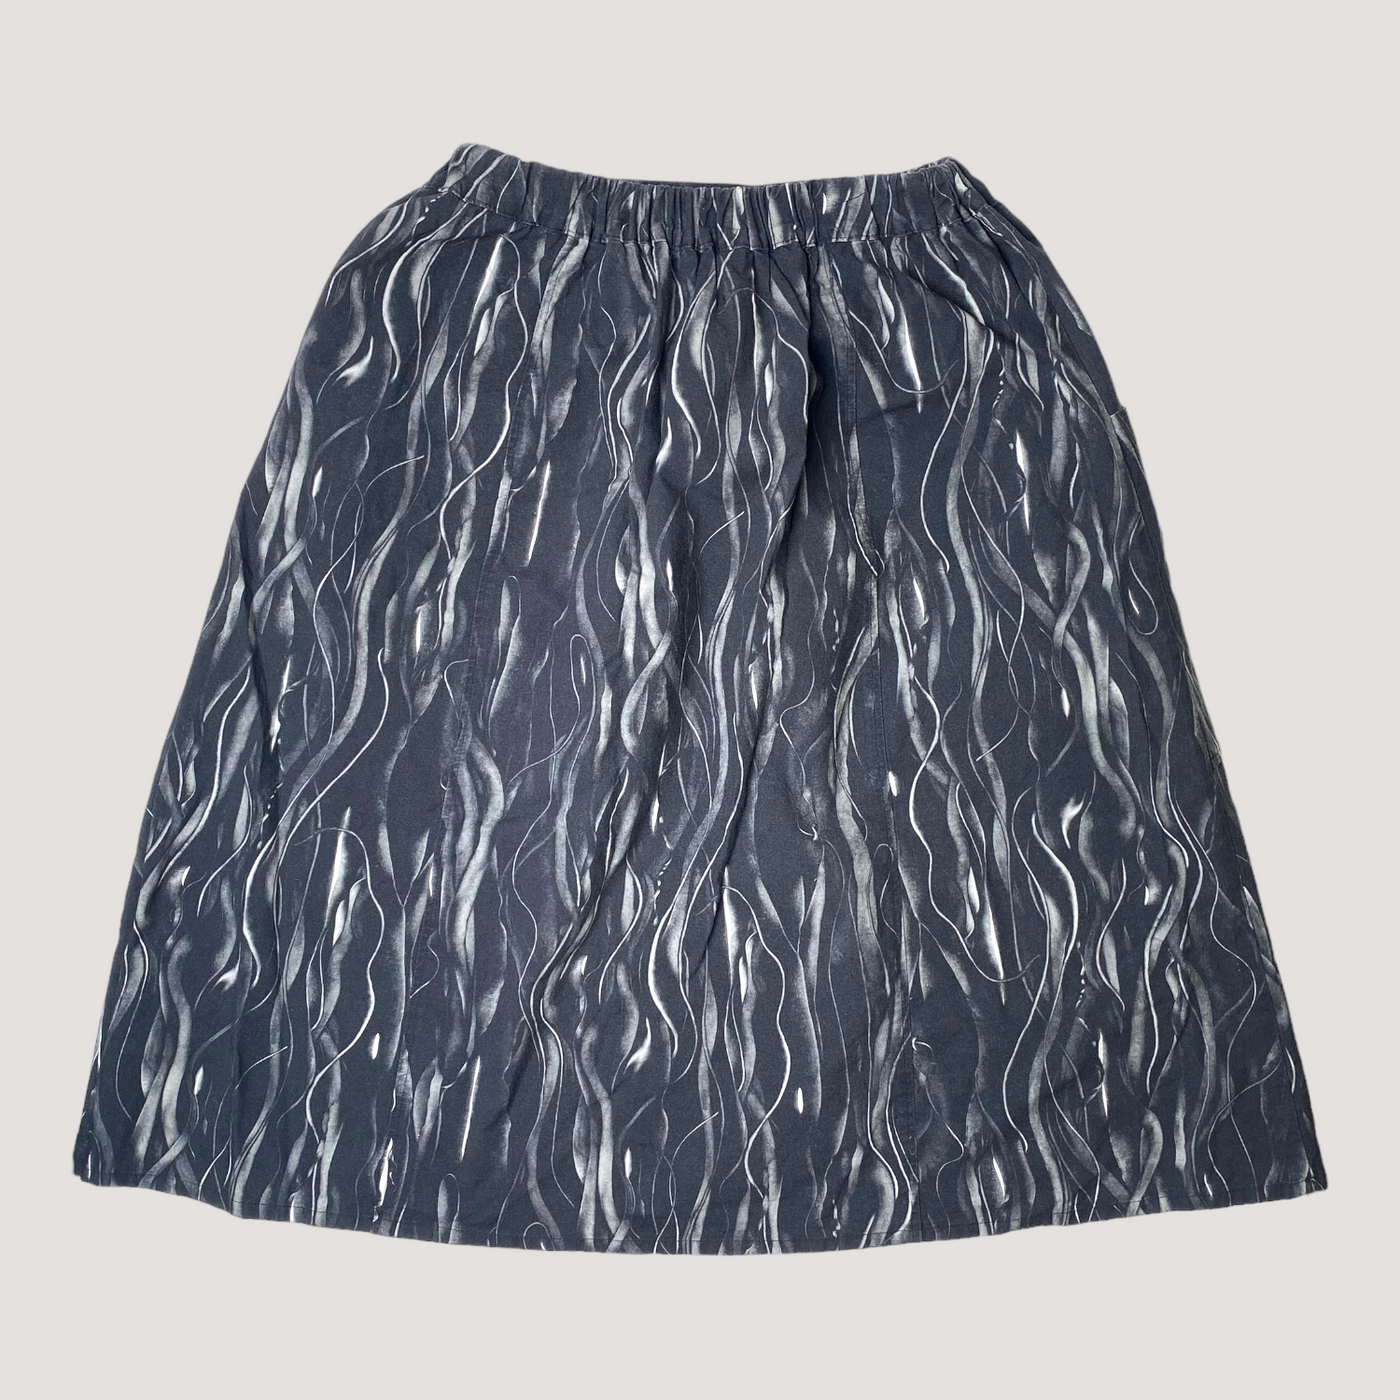 Vimma woven skirt, black and white | woman onesize